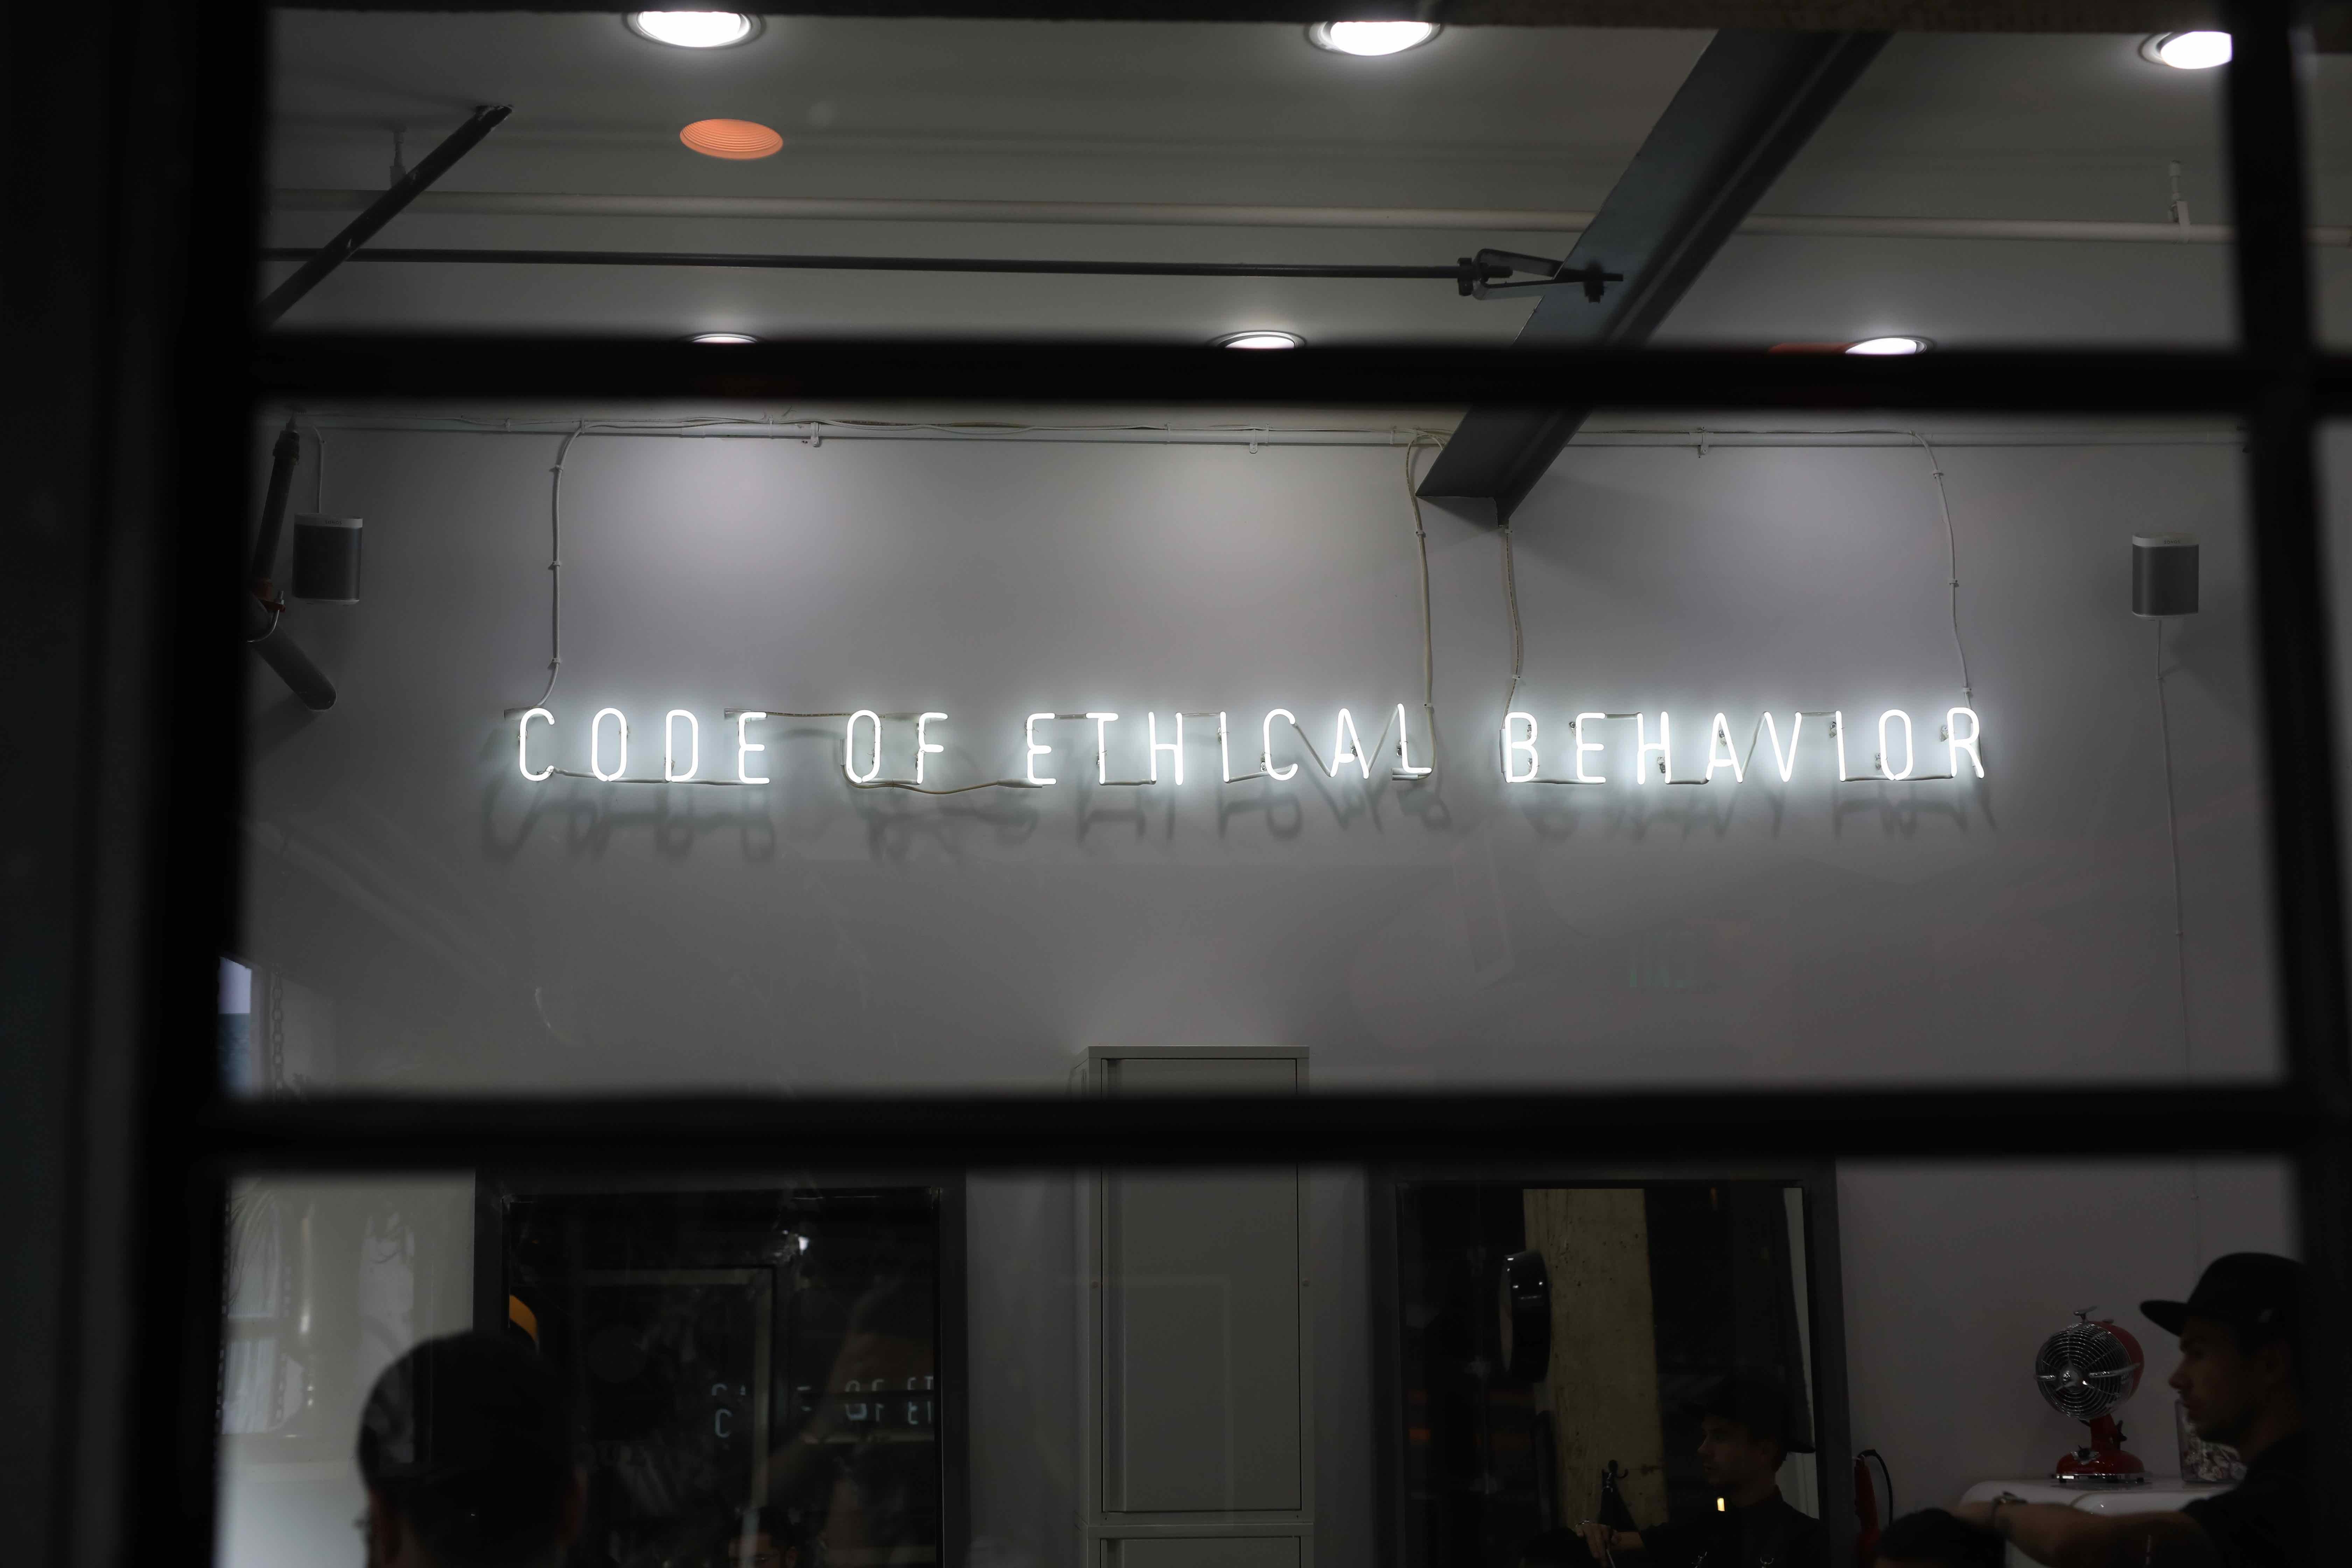 Data ethics. Neon sign saying code of ethical behaviour